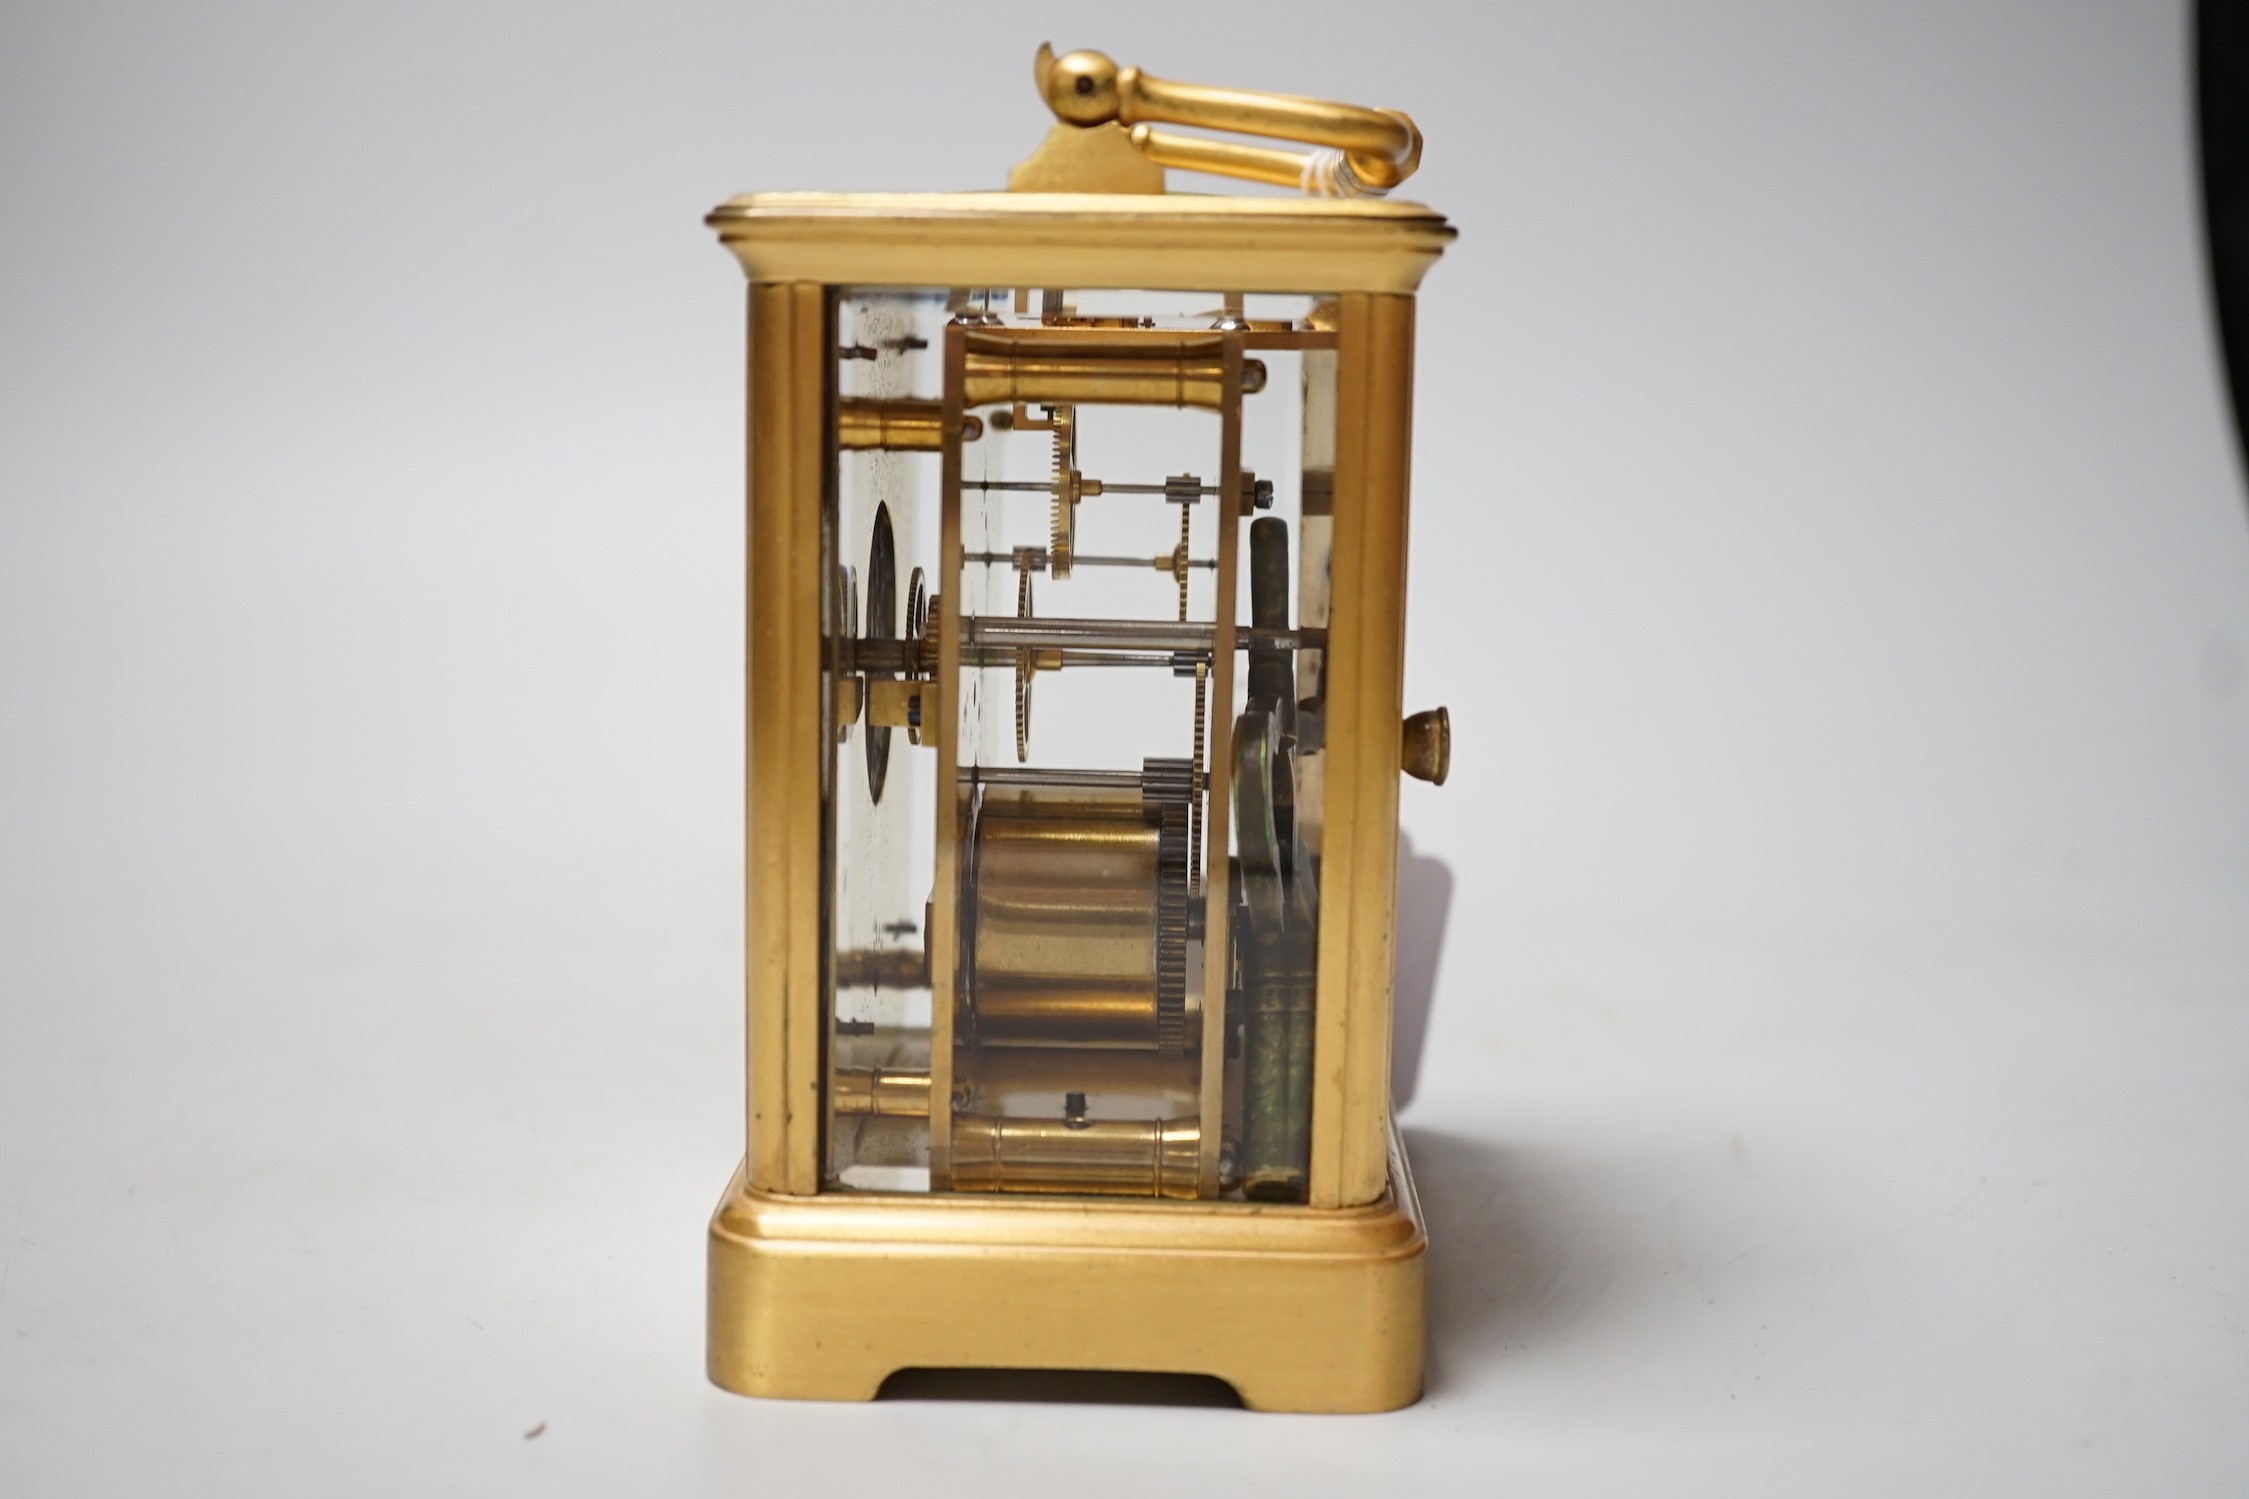 An early 20th century lacquered brass carriage timepiece marked Goldsmiths Alliance, London 17554 - Image 2 of 4